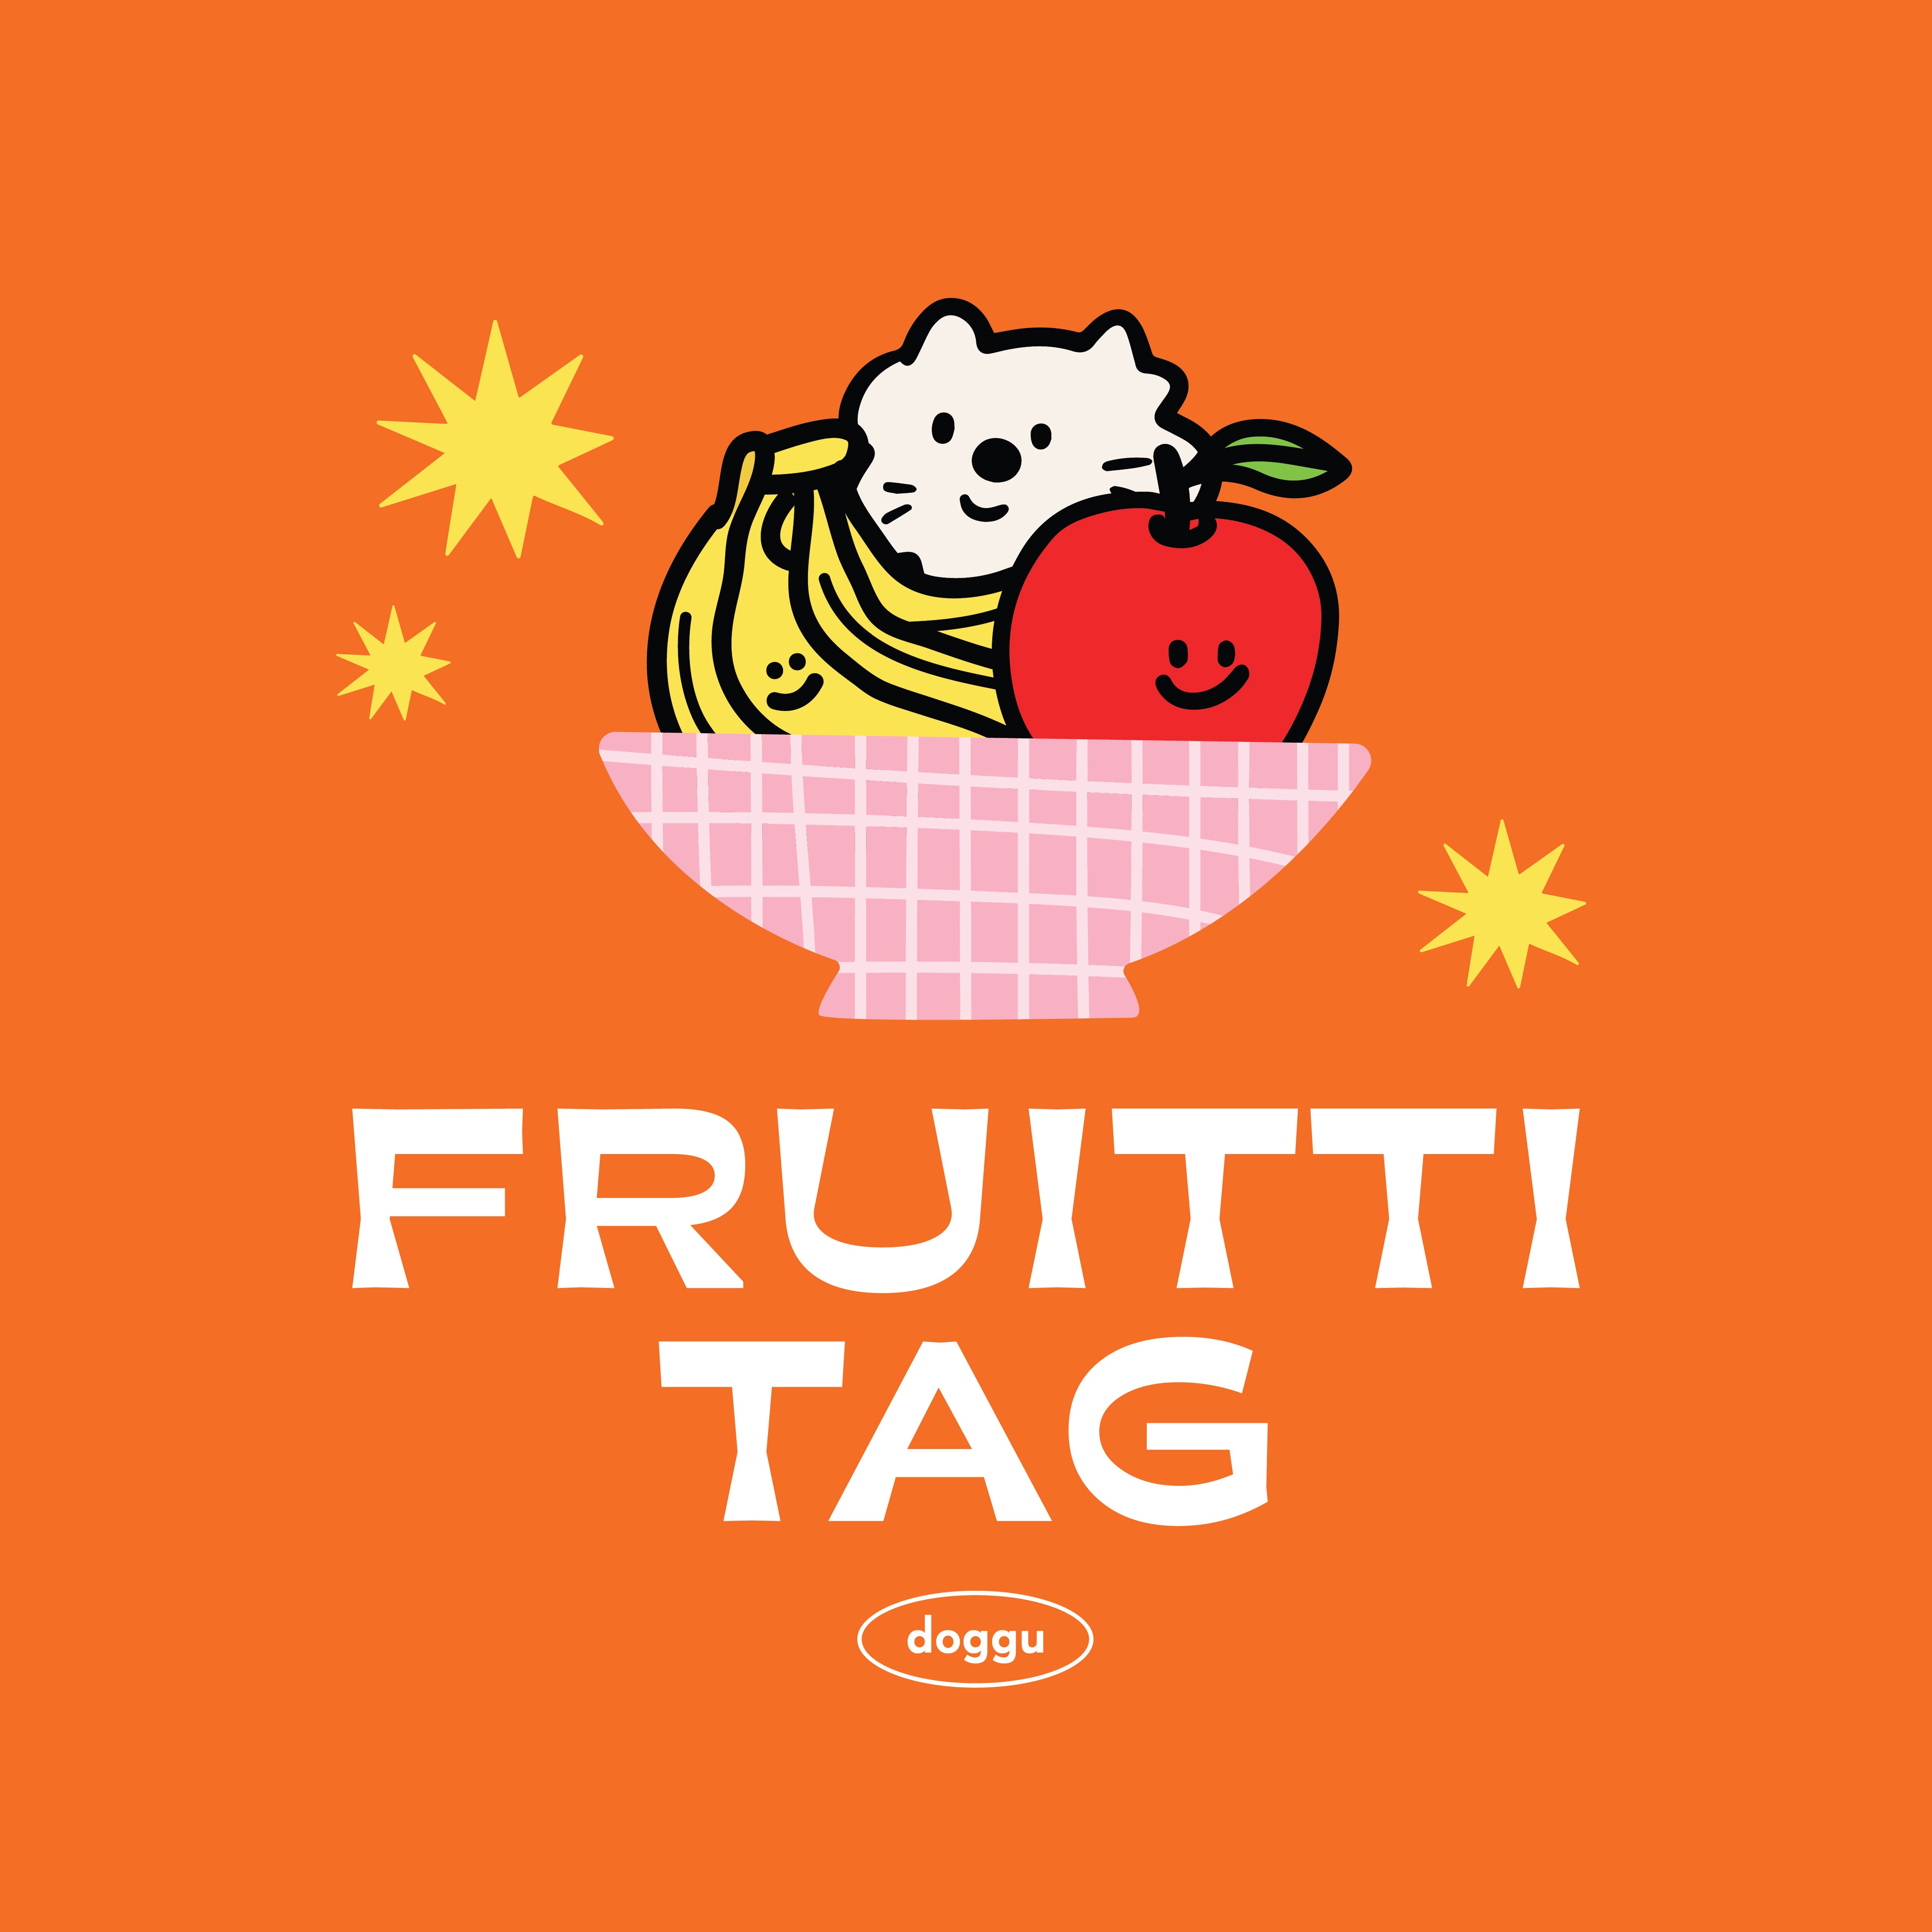 Personalise Fruitti Tag in